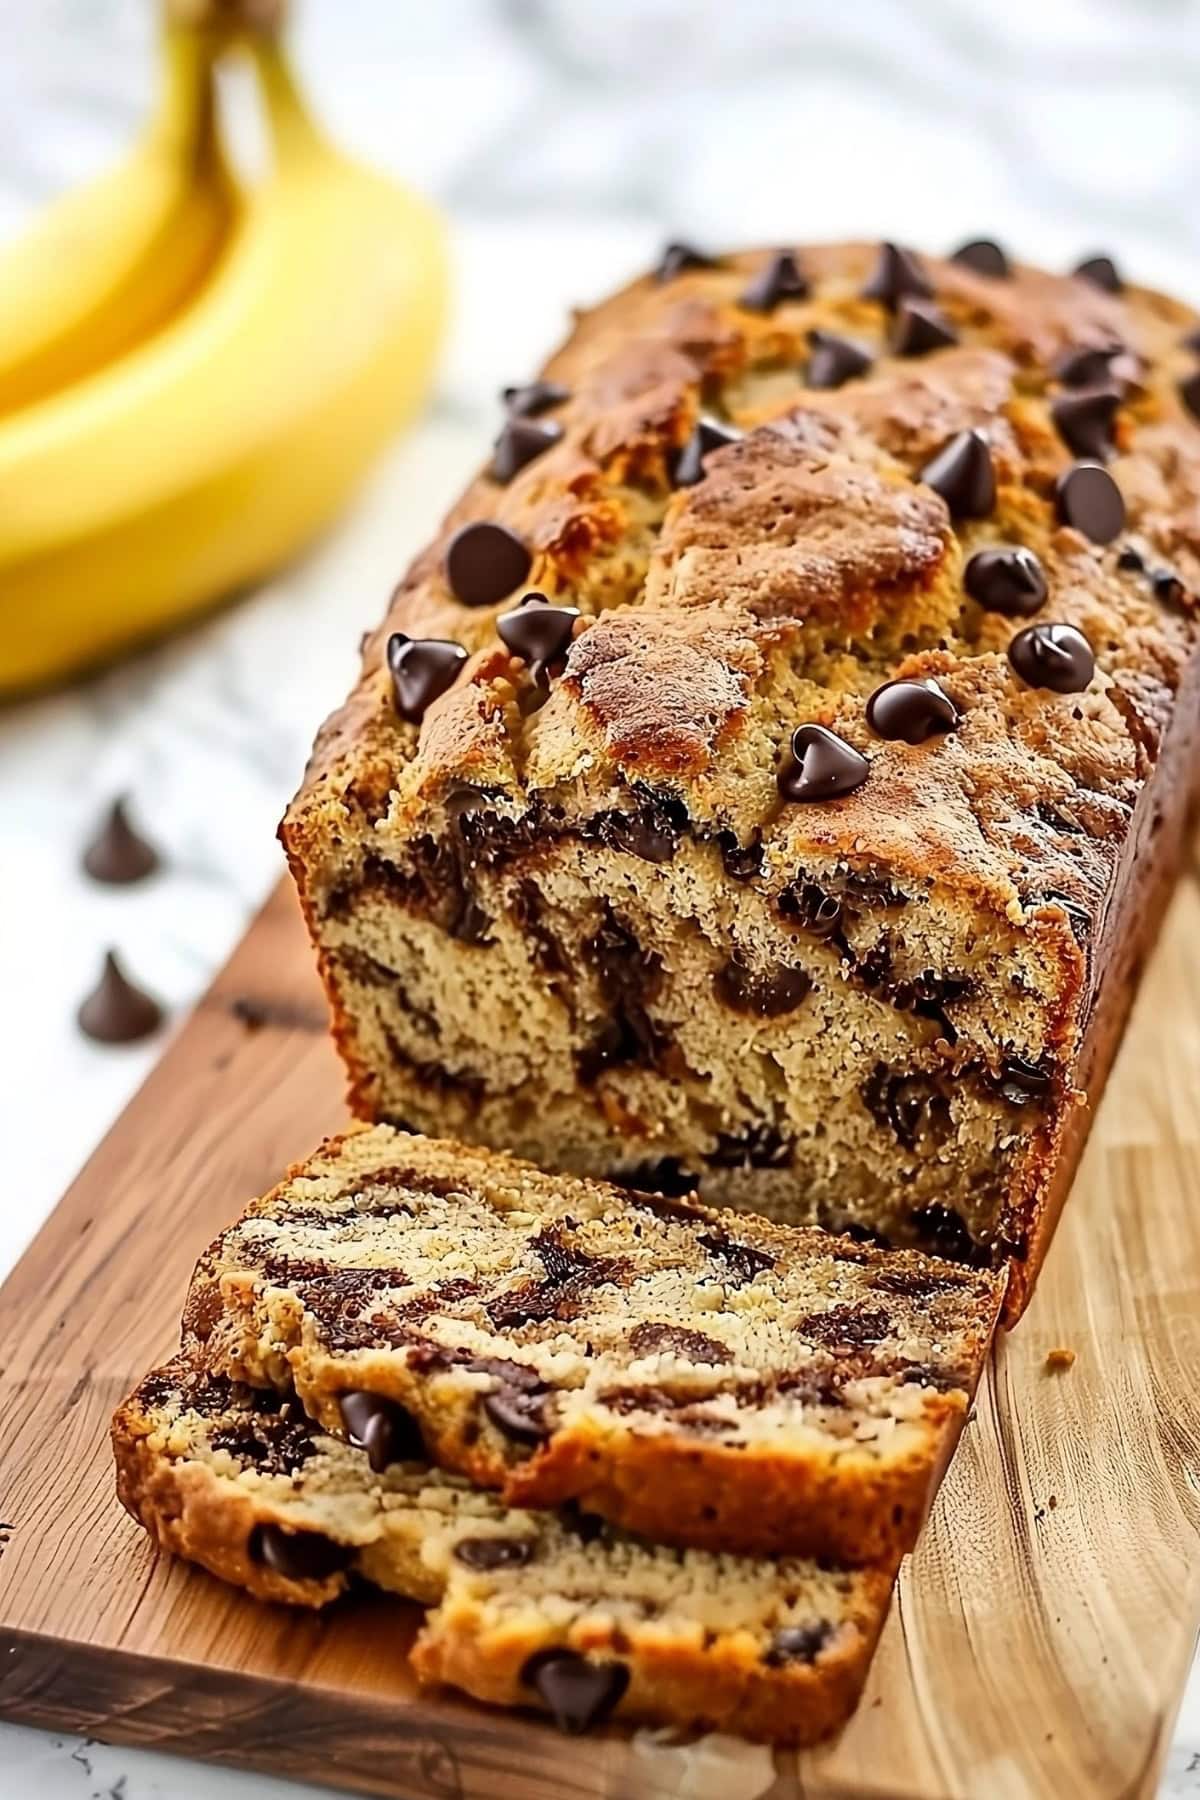 Sliced peanut butter banana loaf bread with chocolate chips on a wooden board.